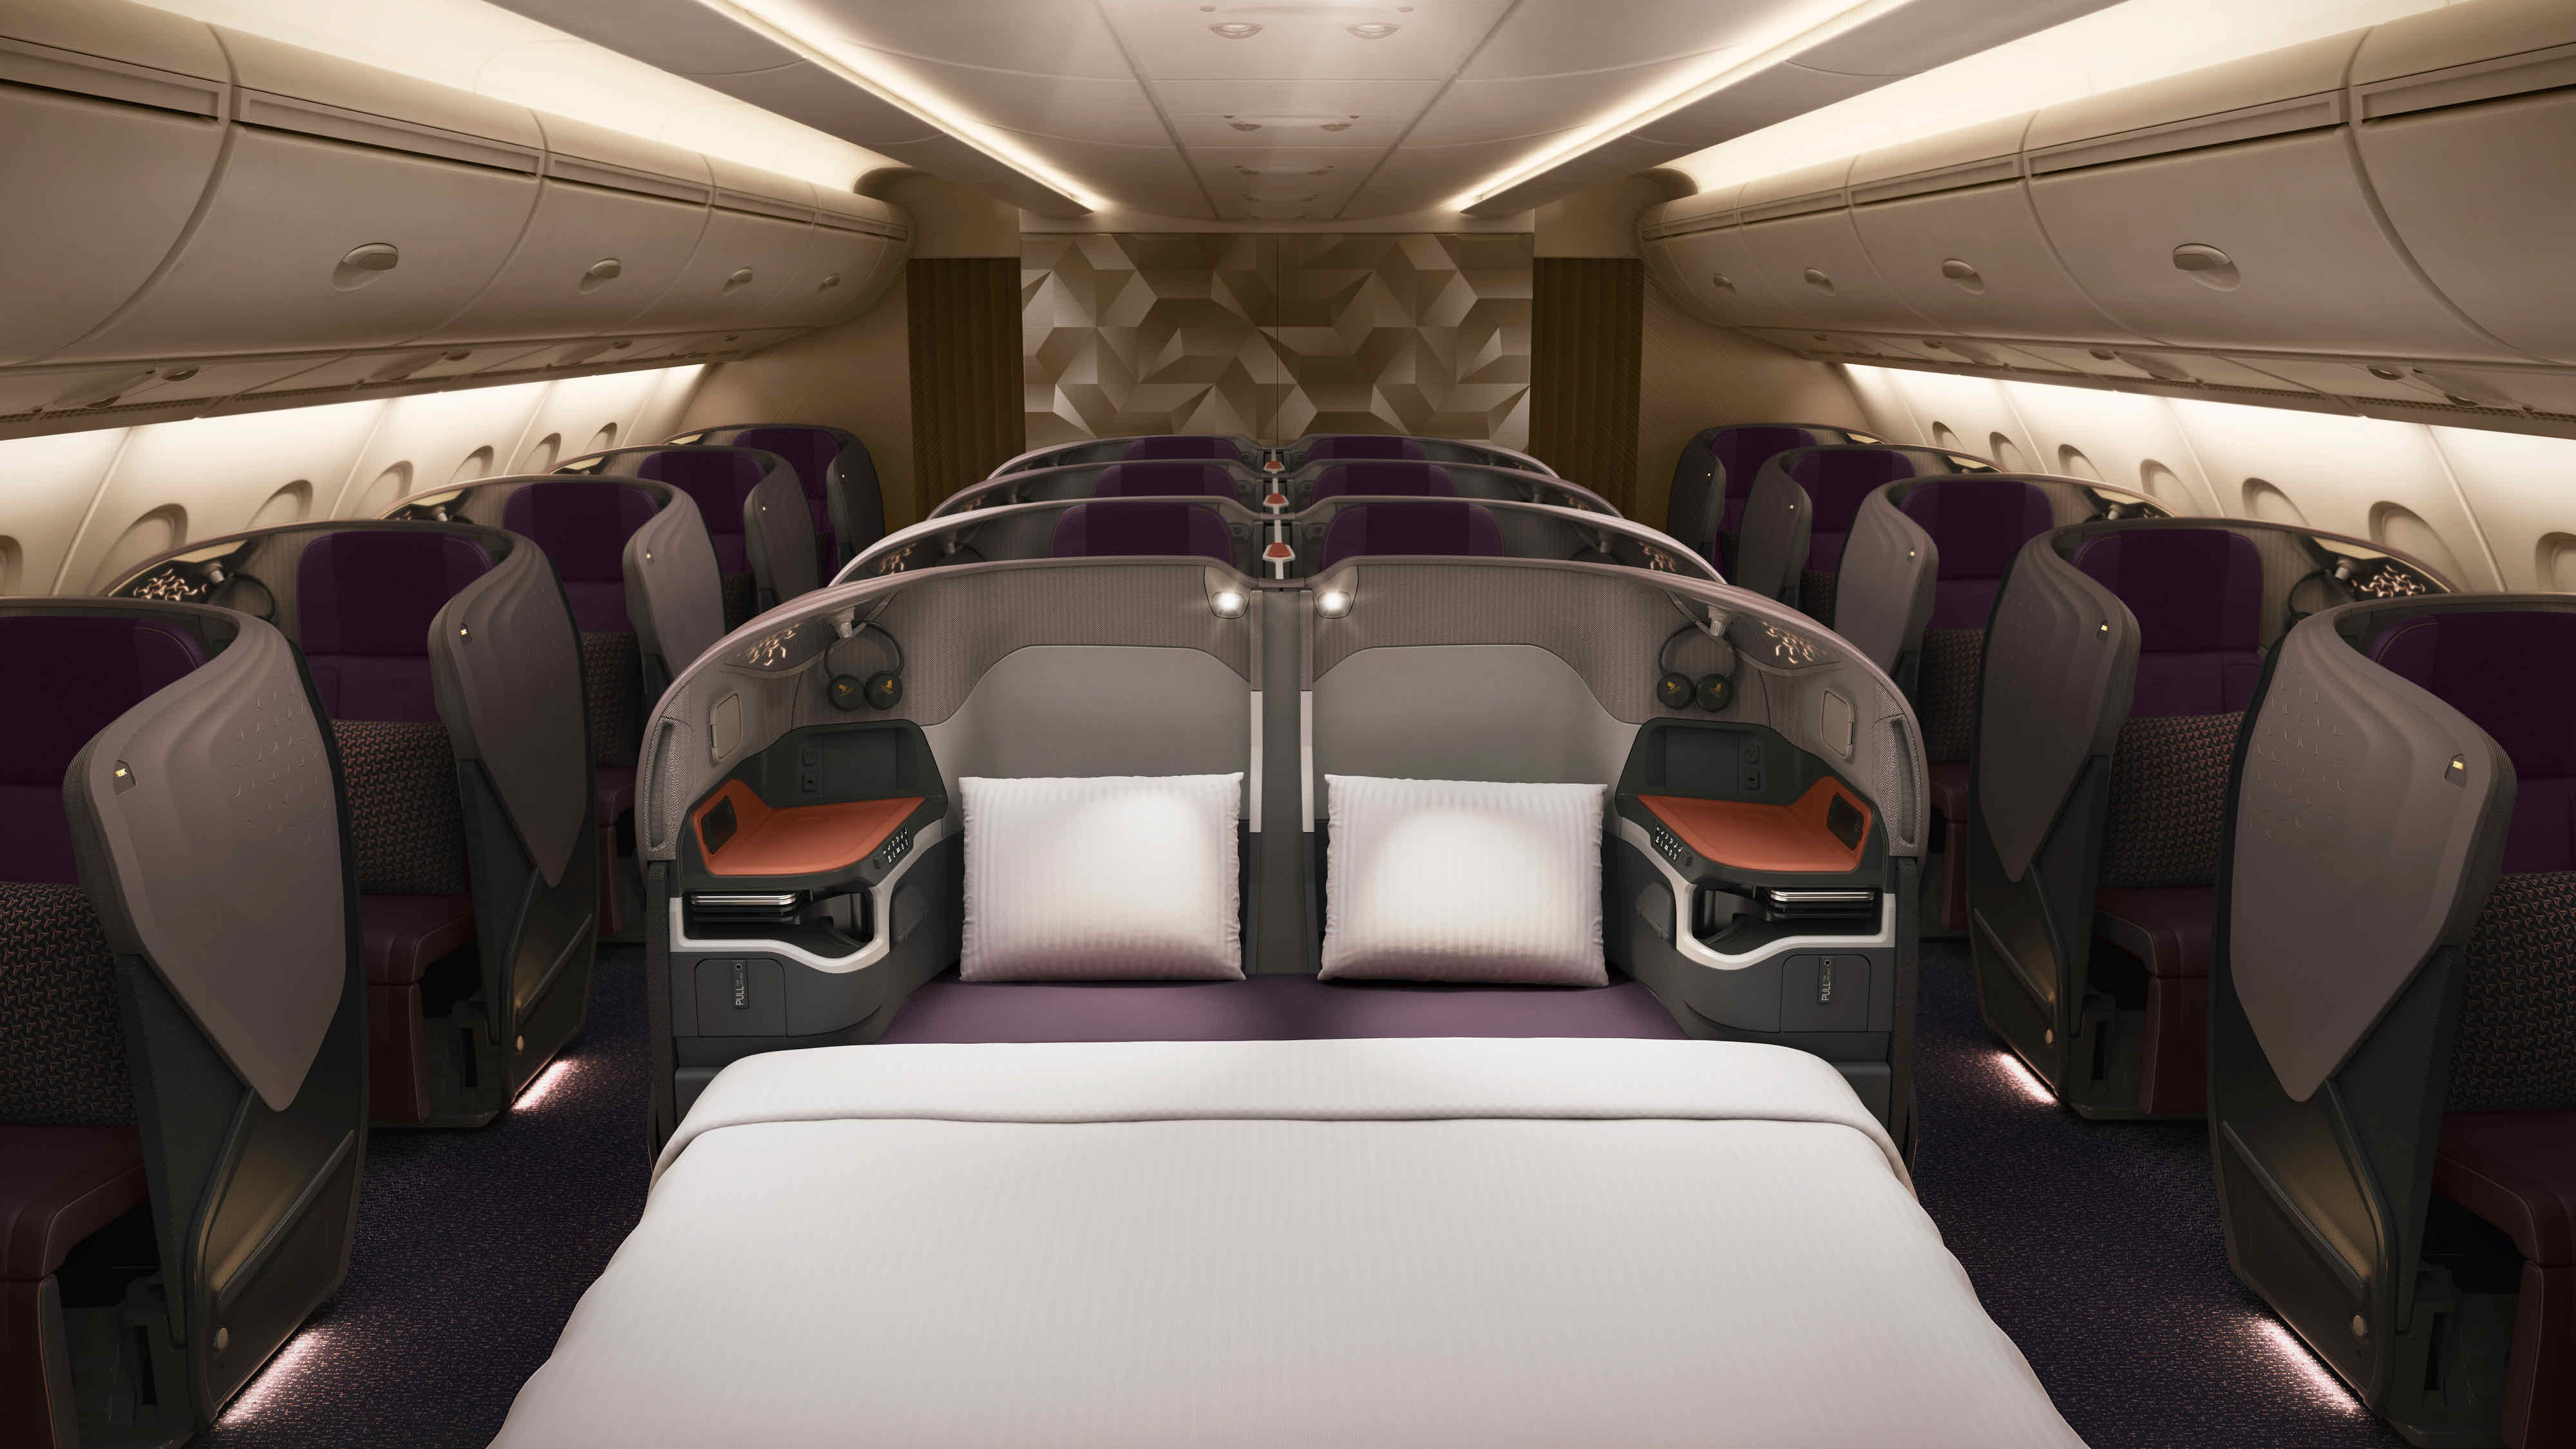 Singapore Airlines A380 New Business Class lie-flat bed